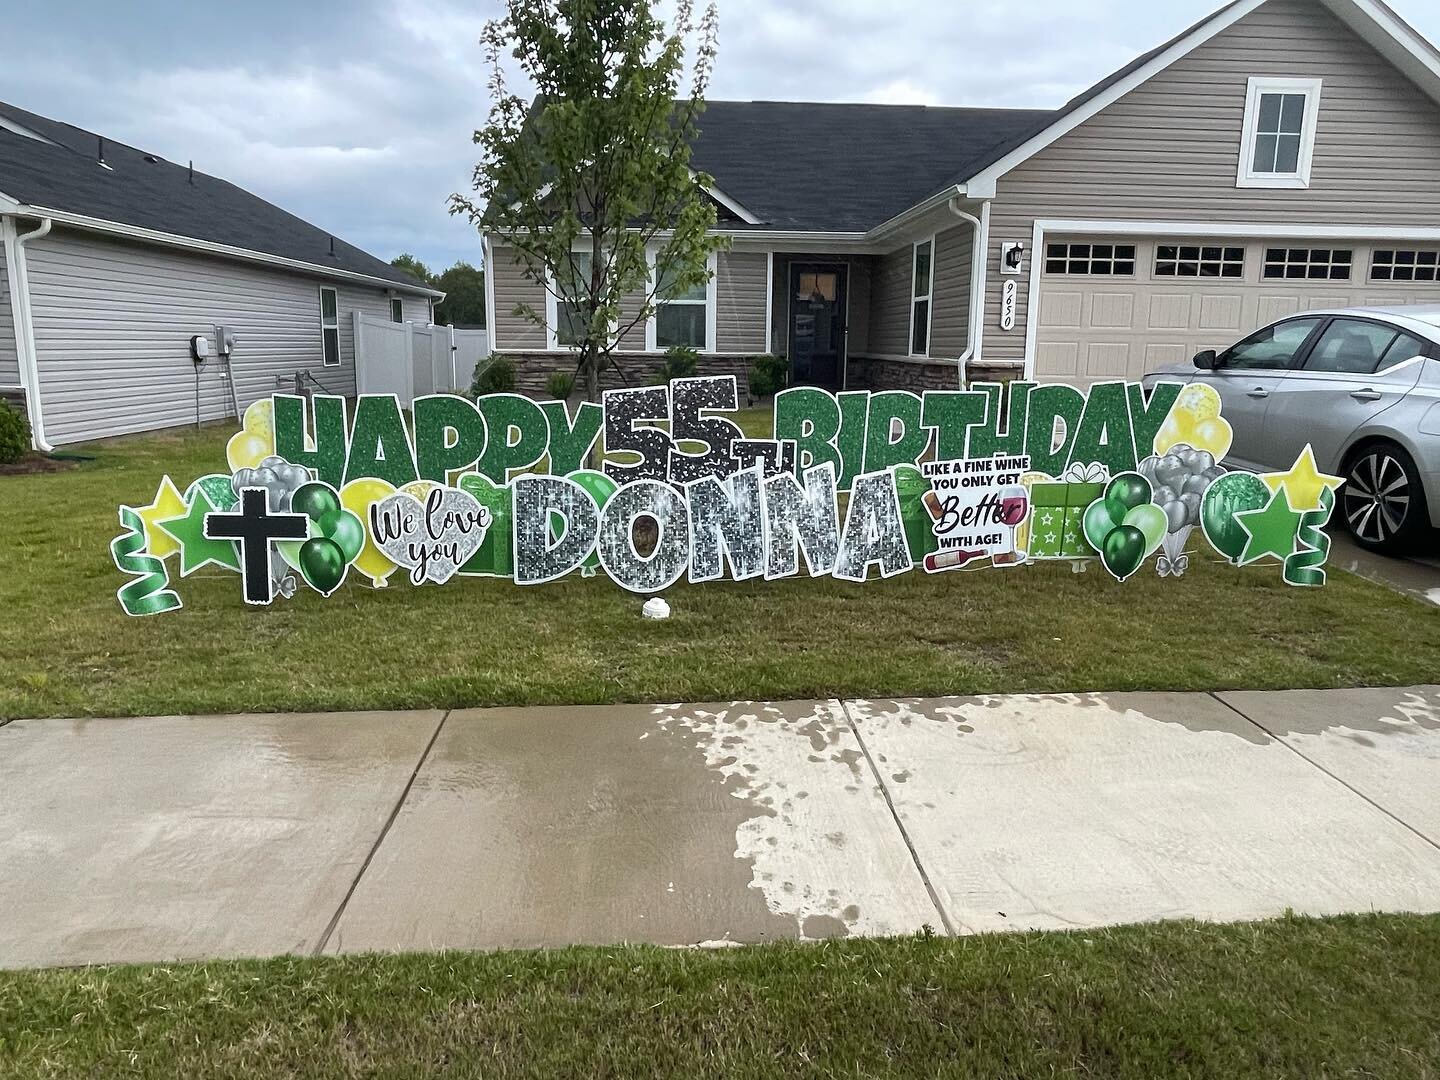 Donna loves green and he yellow 😍🥳

Happy 55th Birthday Donna!

#Harrisburgyardcard #harrisburgnc #concordnc #midlandnc #yardcard #yardsign #happybirthday #party #celebrate #sayitintheyard #supportlocal